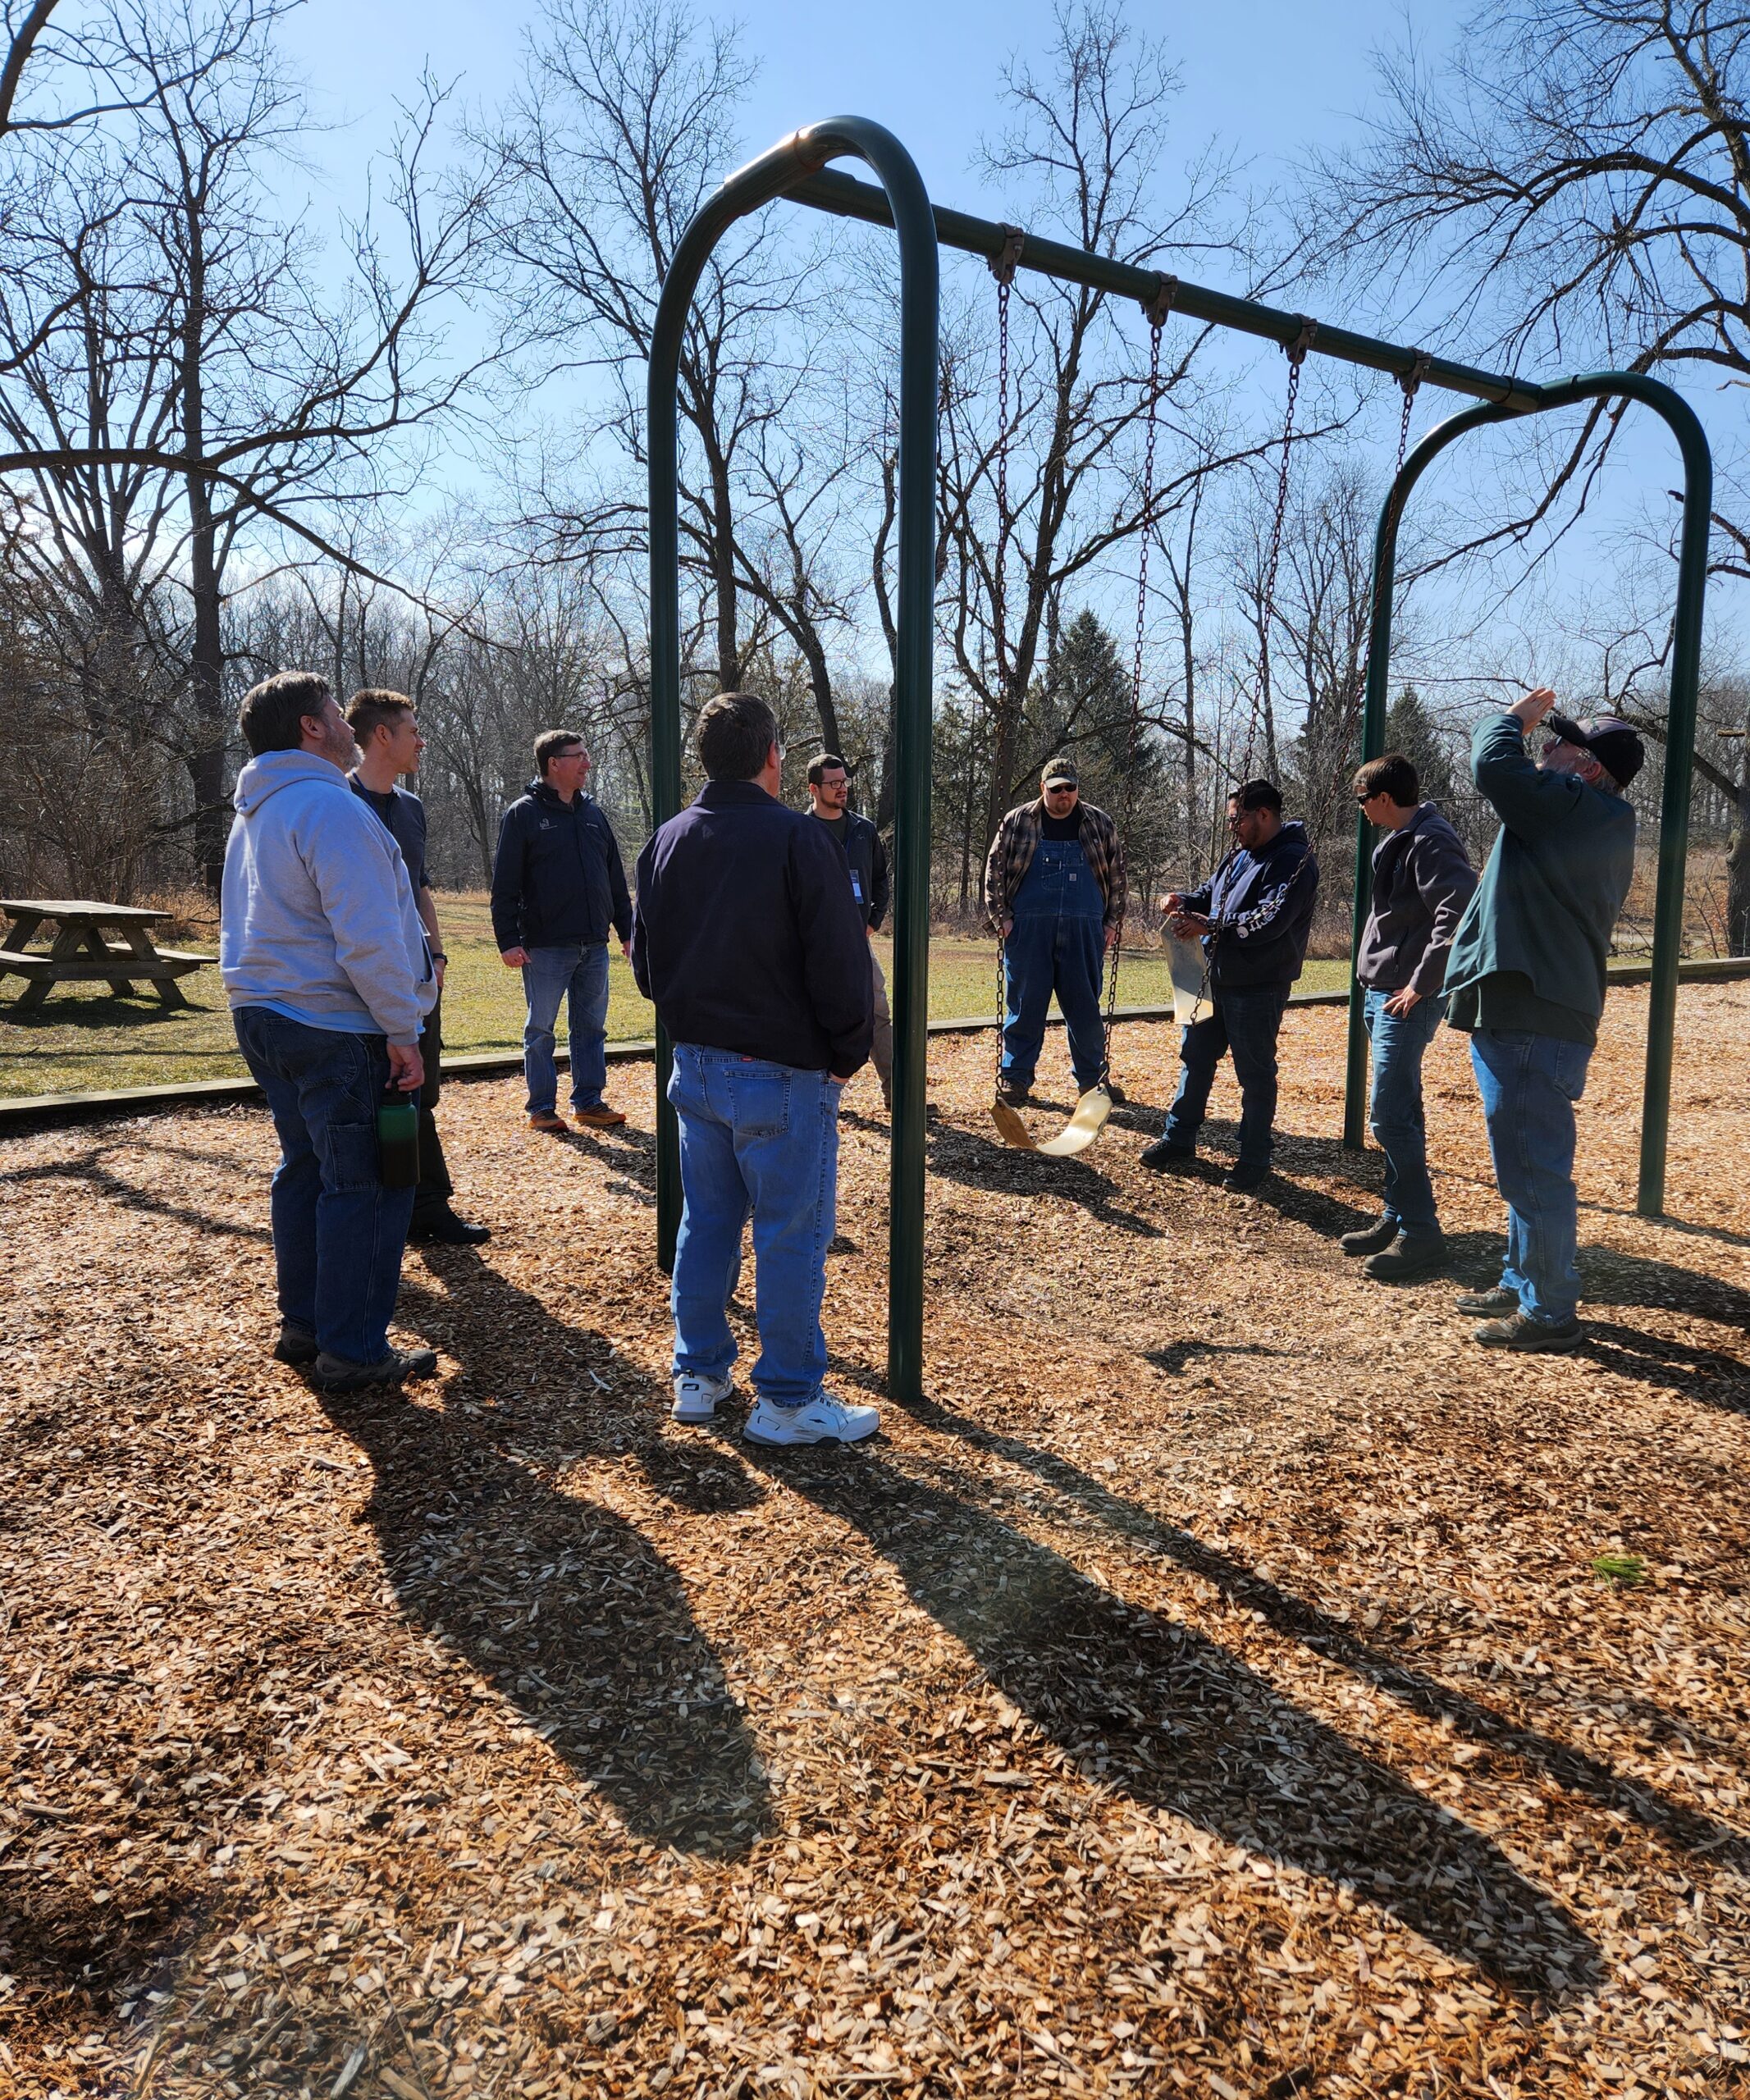 A group of people standing around a swing set on a park playground